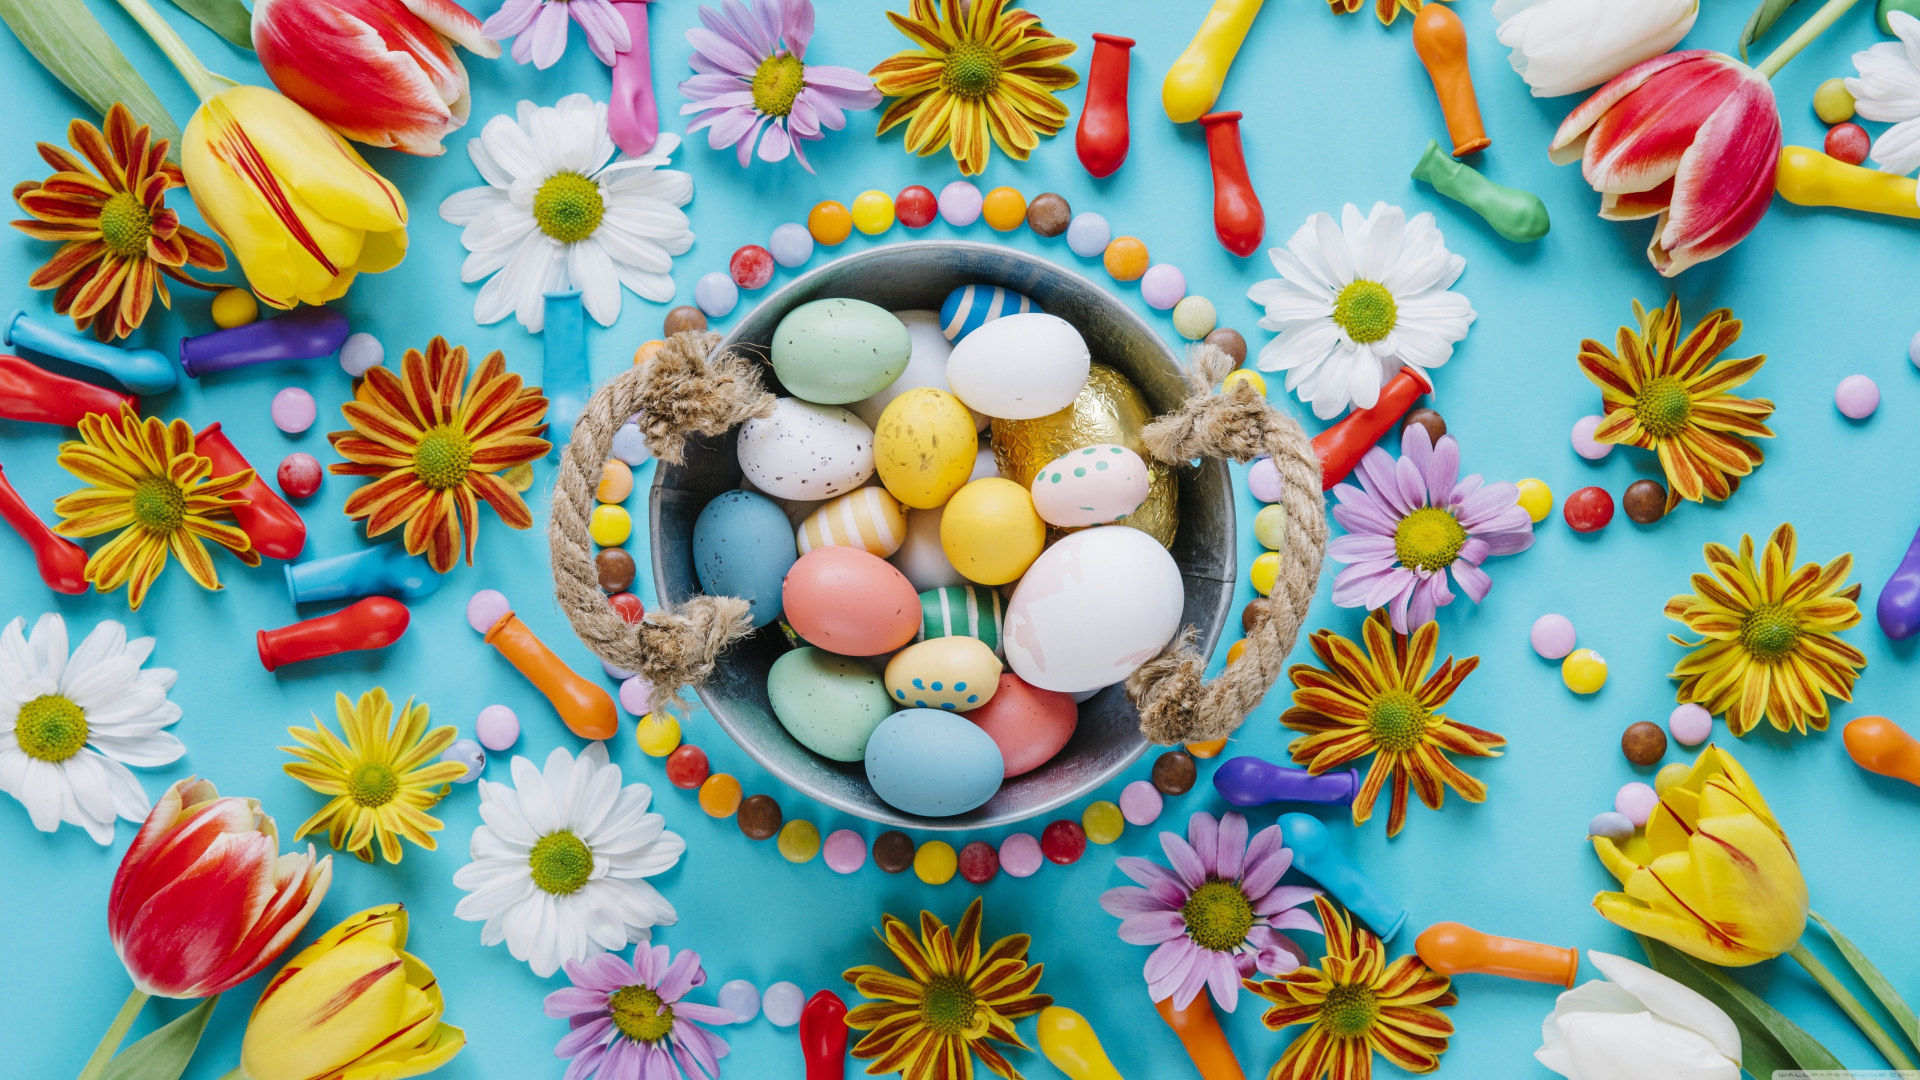 Download wallpaper 1920x1080 2022, easter festival, colorful eggs, spring,  full hd, hdtv, fhd, 1080p wallpaper, 1920x1080 hd background, 27972